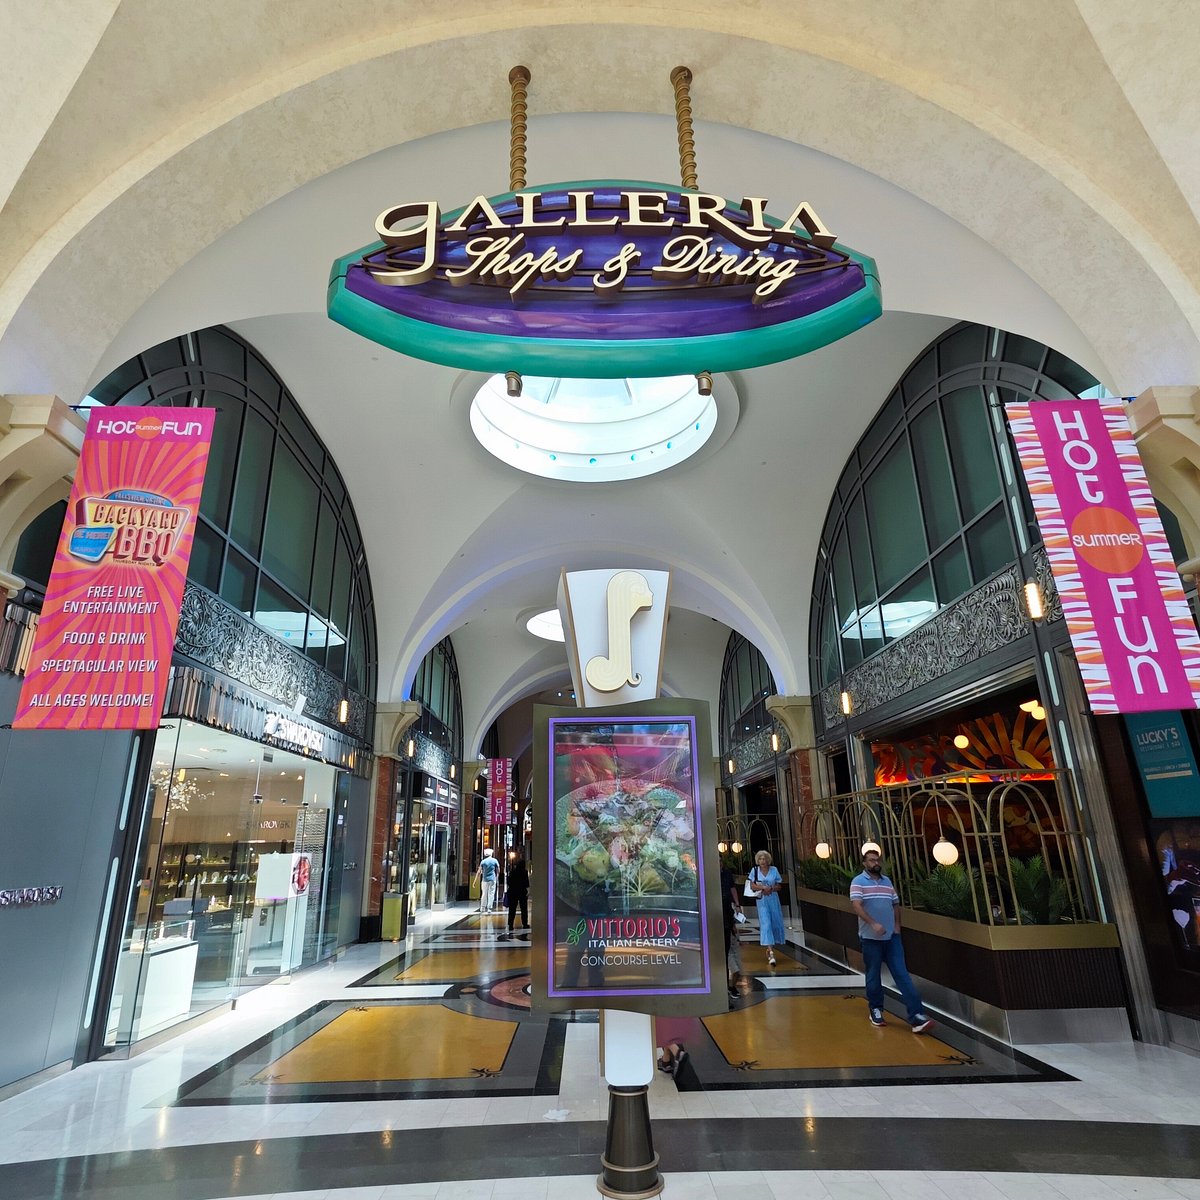 Inside The Galleria: This is everything you need to know before